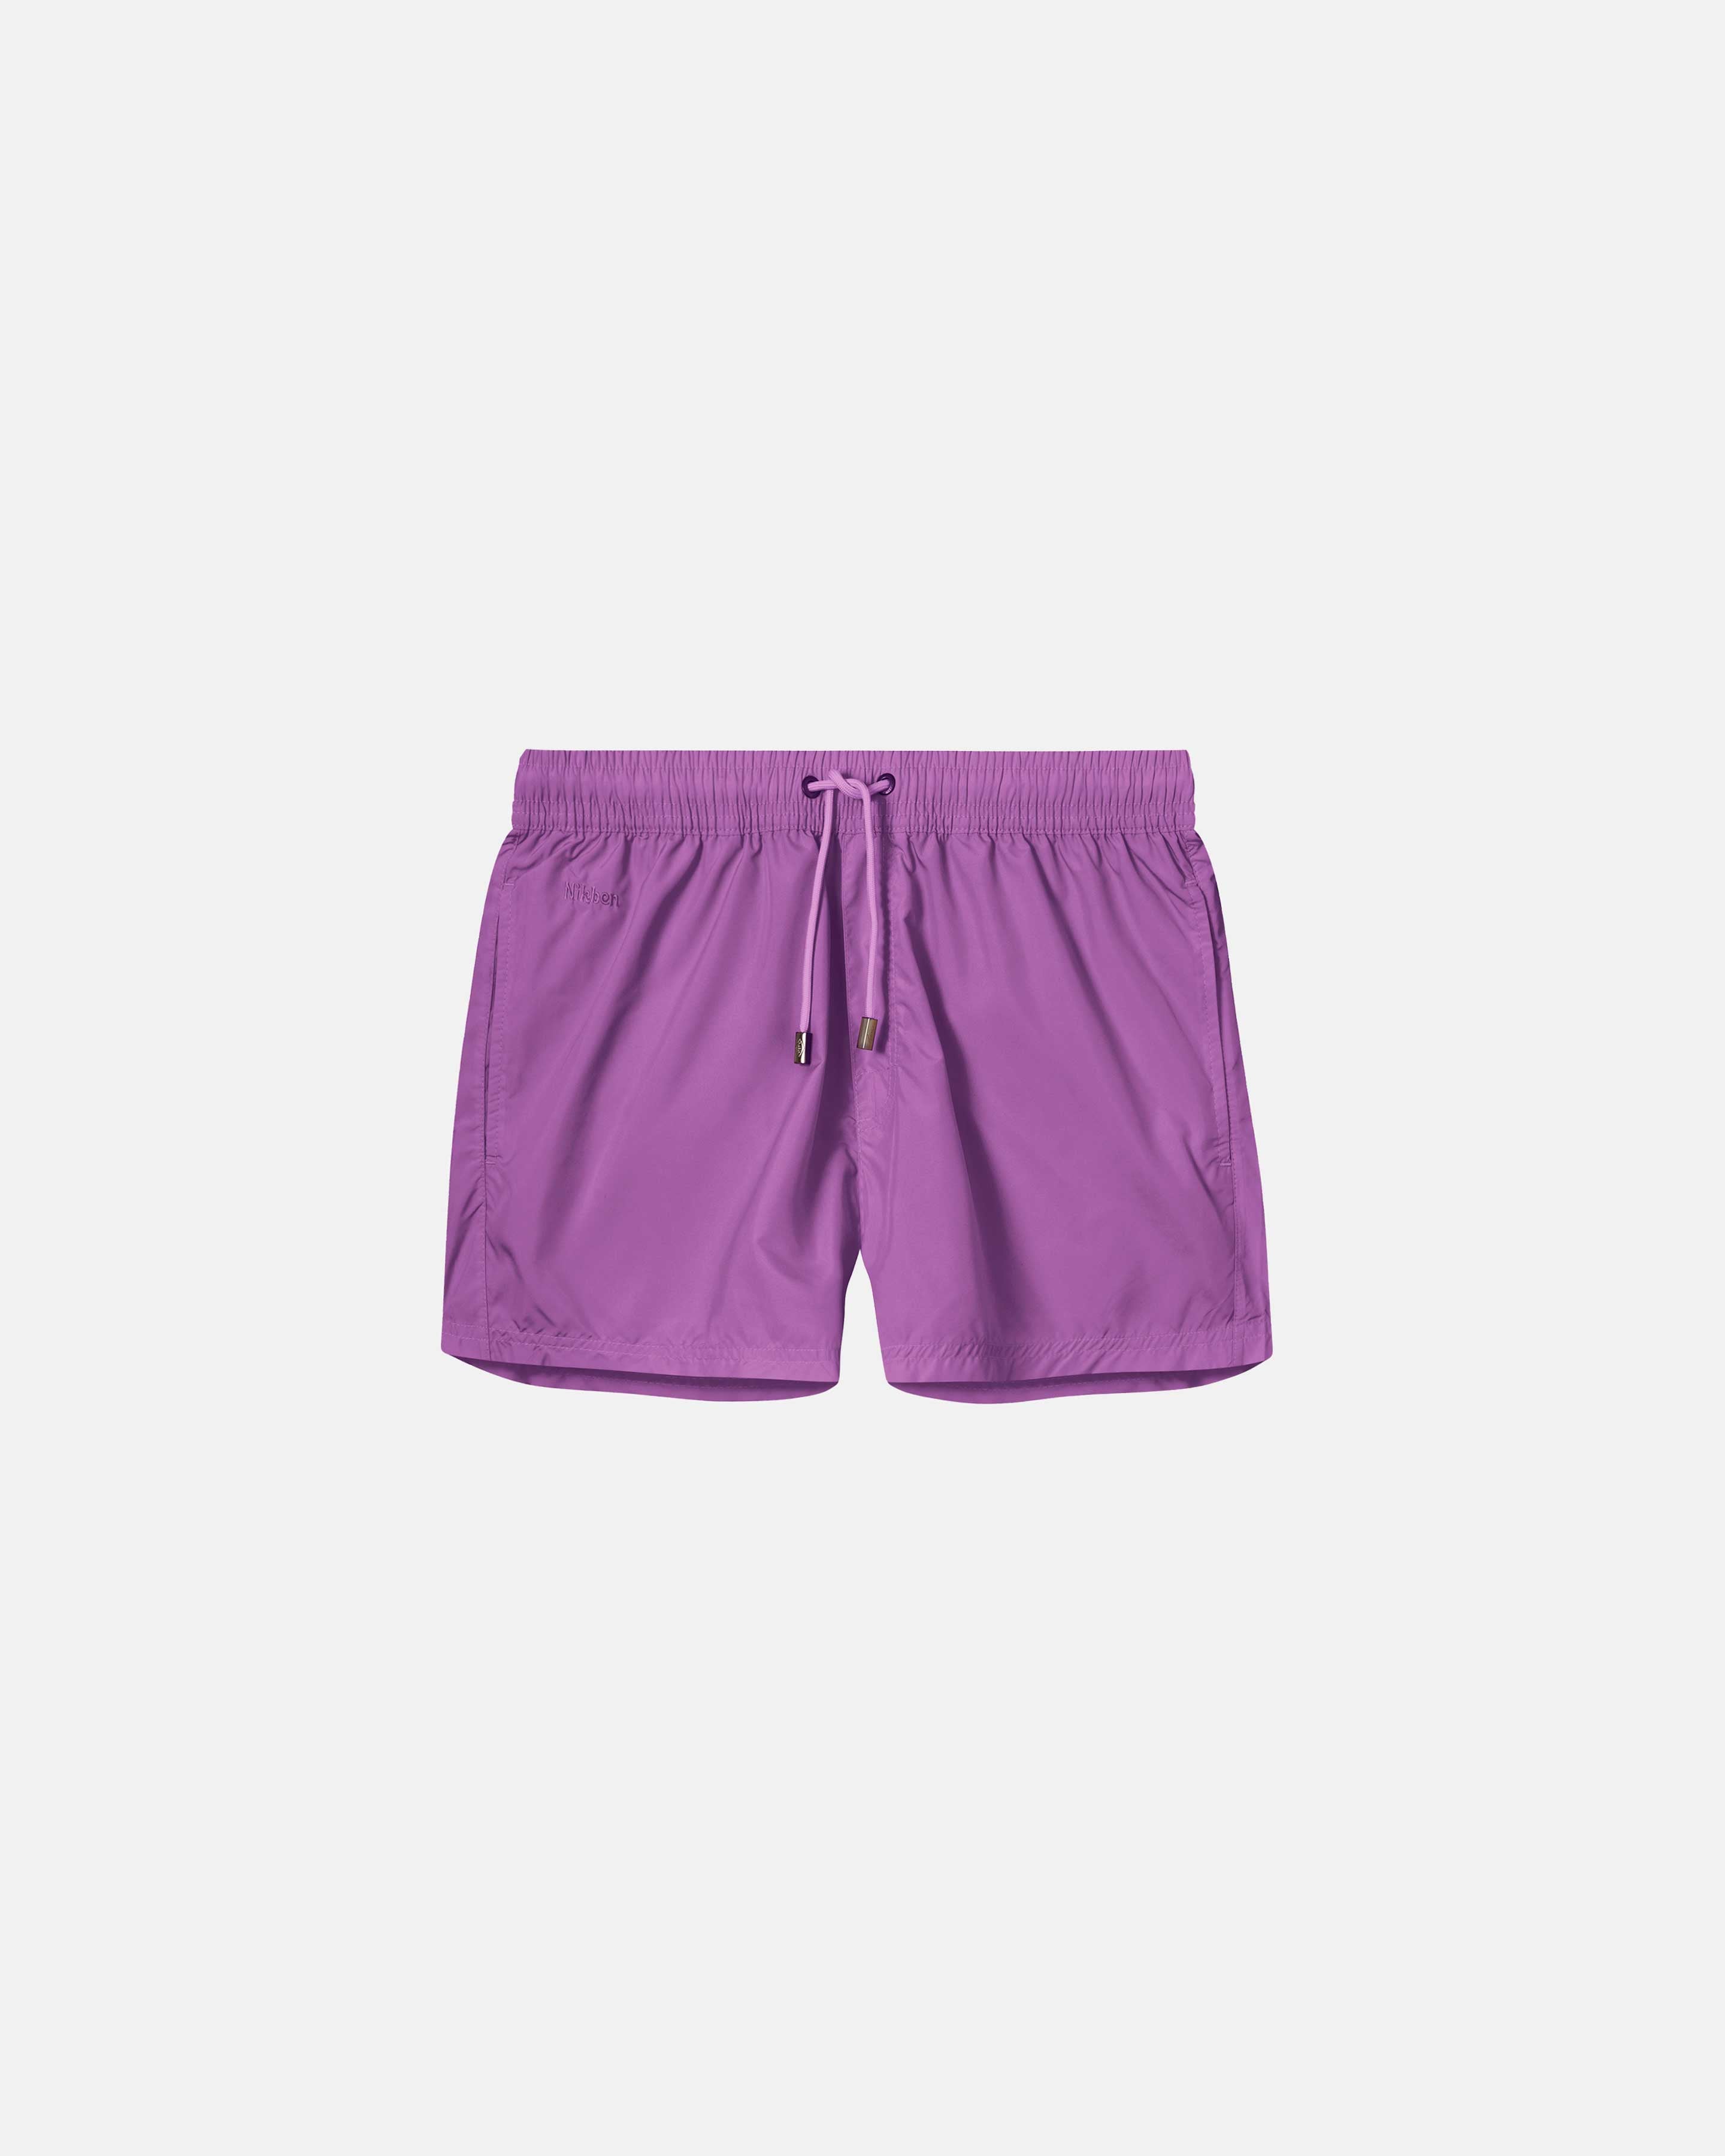 Purple swim trunks. Mid length with drawstring and two side pockets.